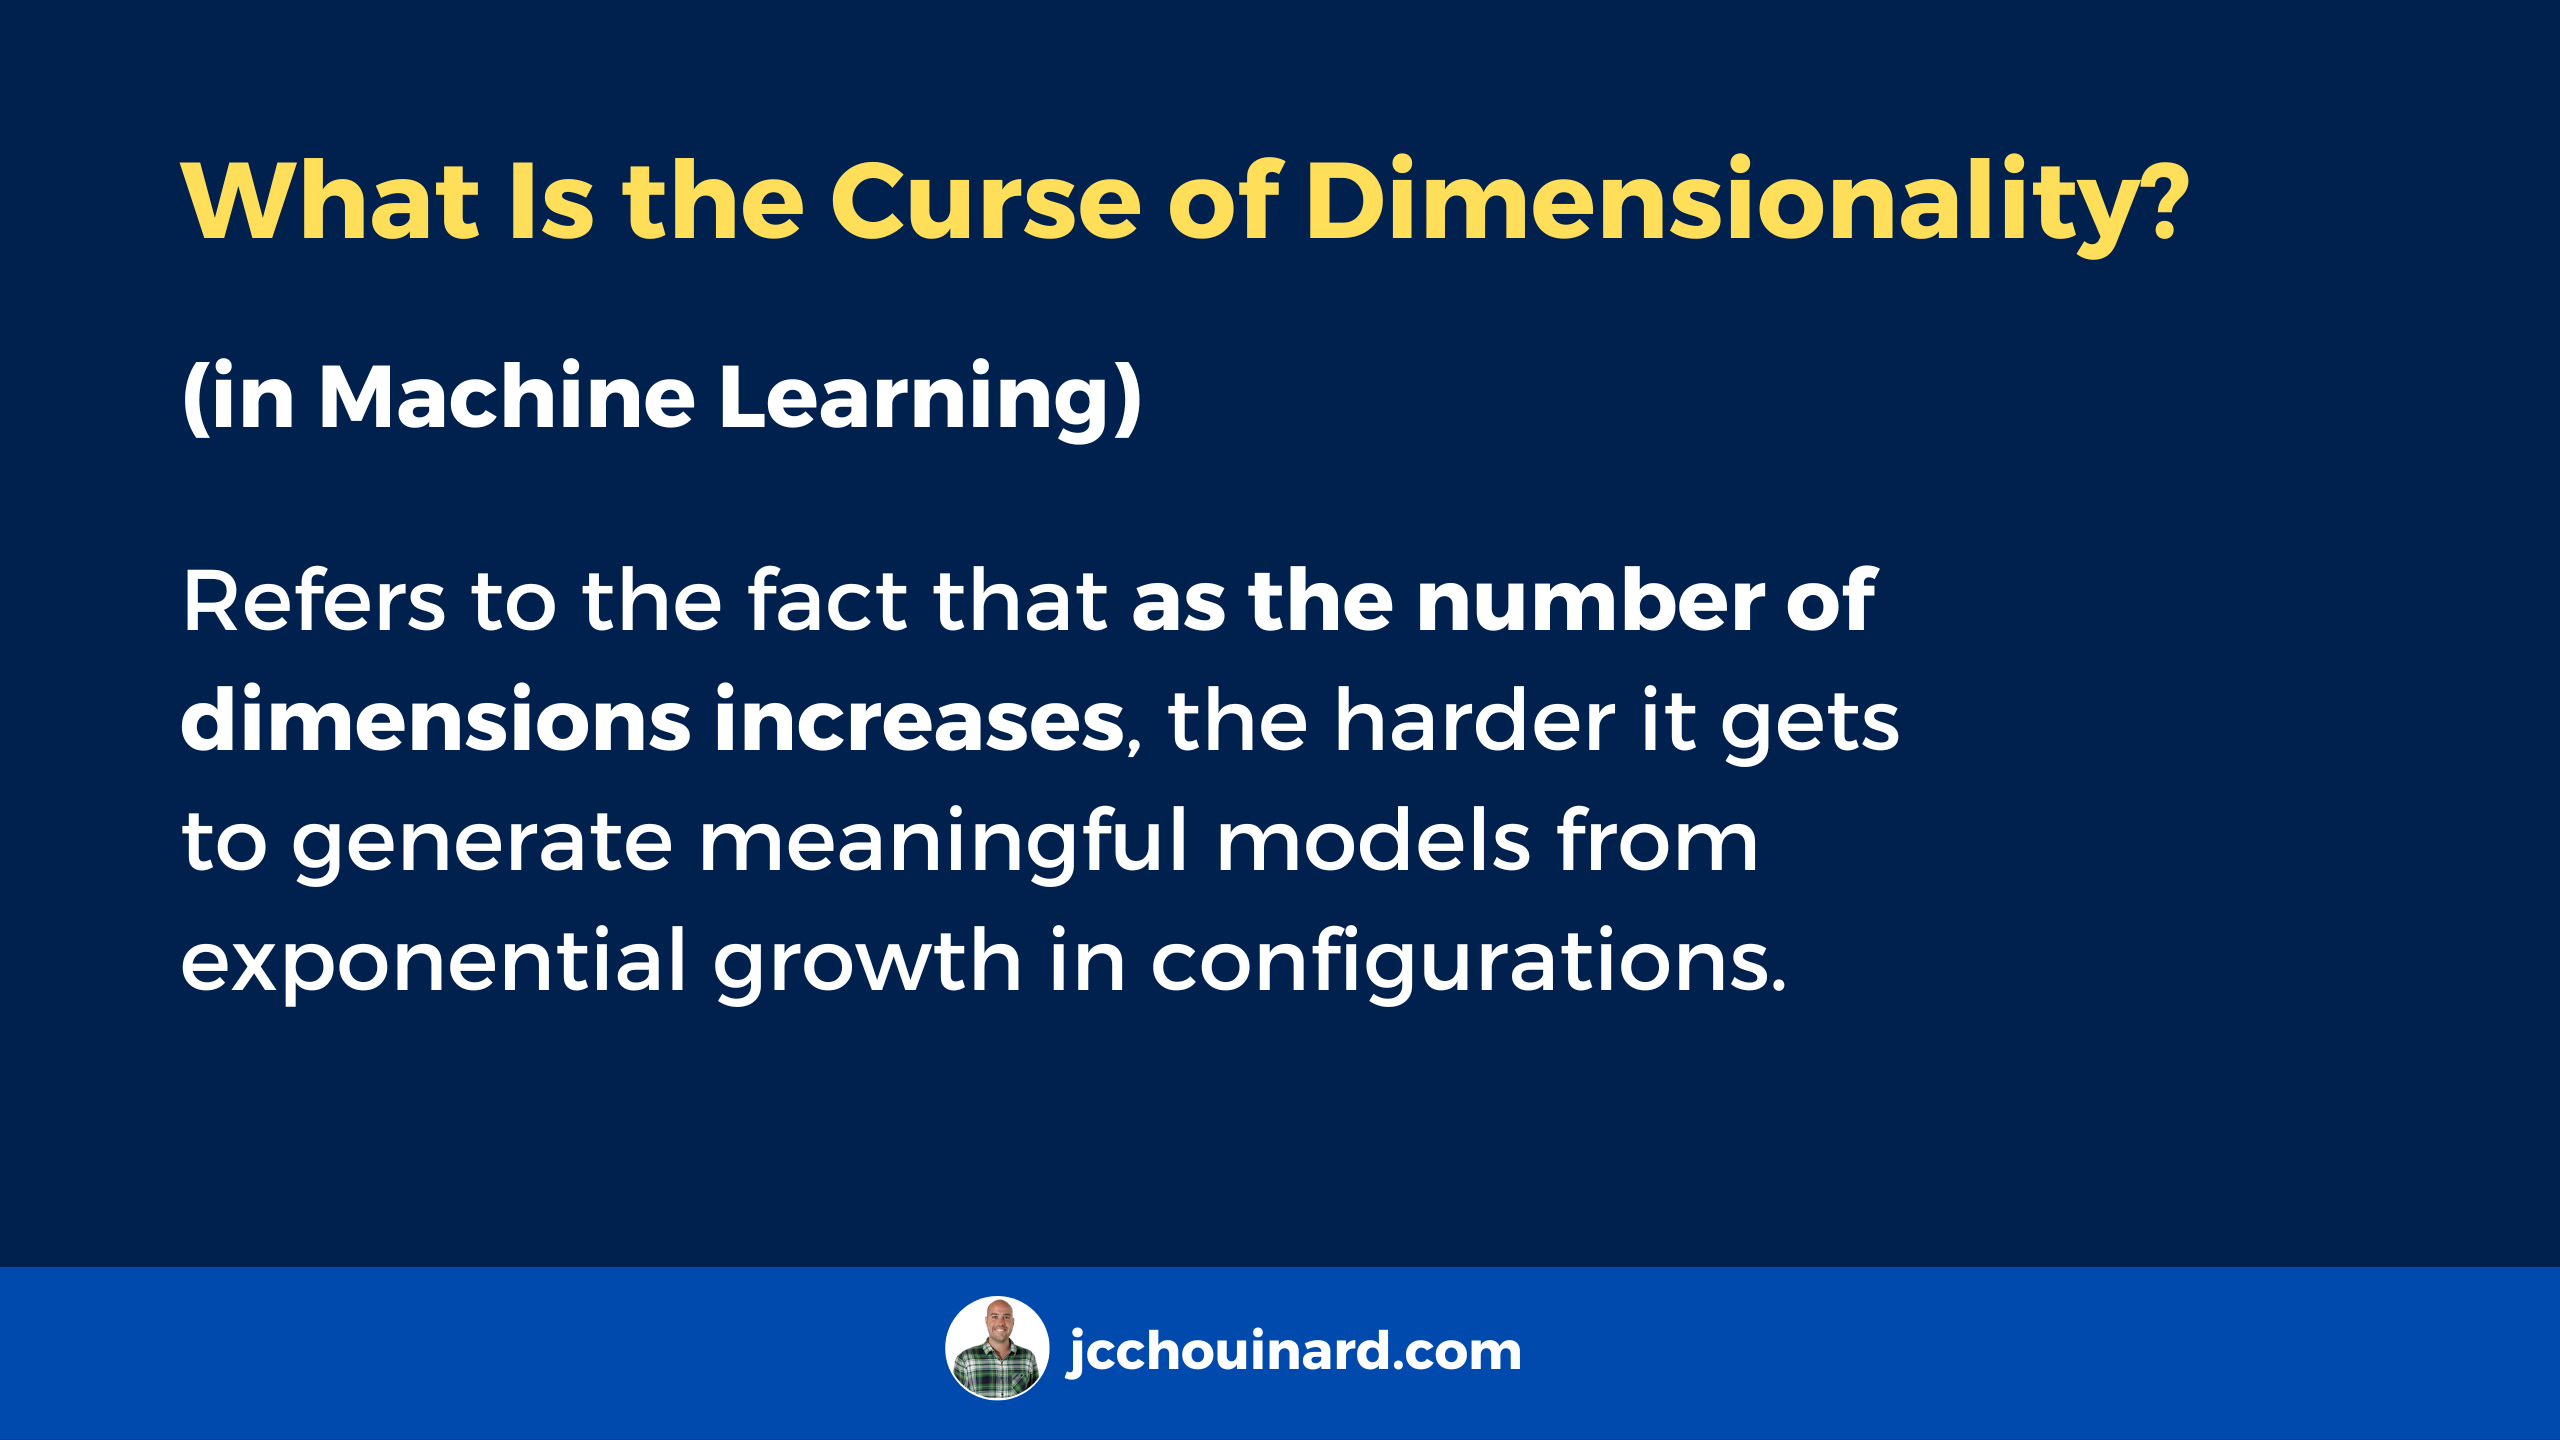 What Is the Curse of Dimensionality in machine learning